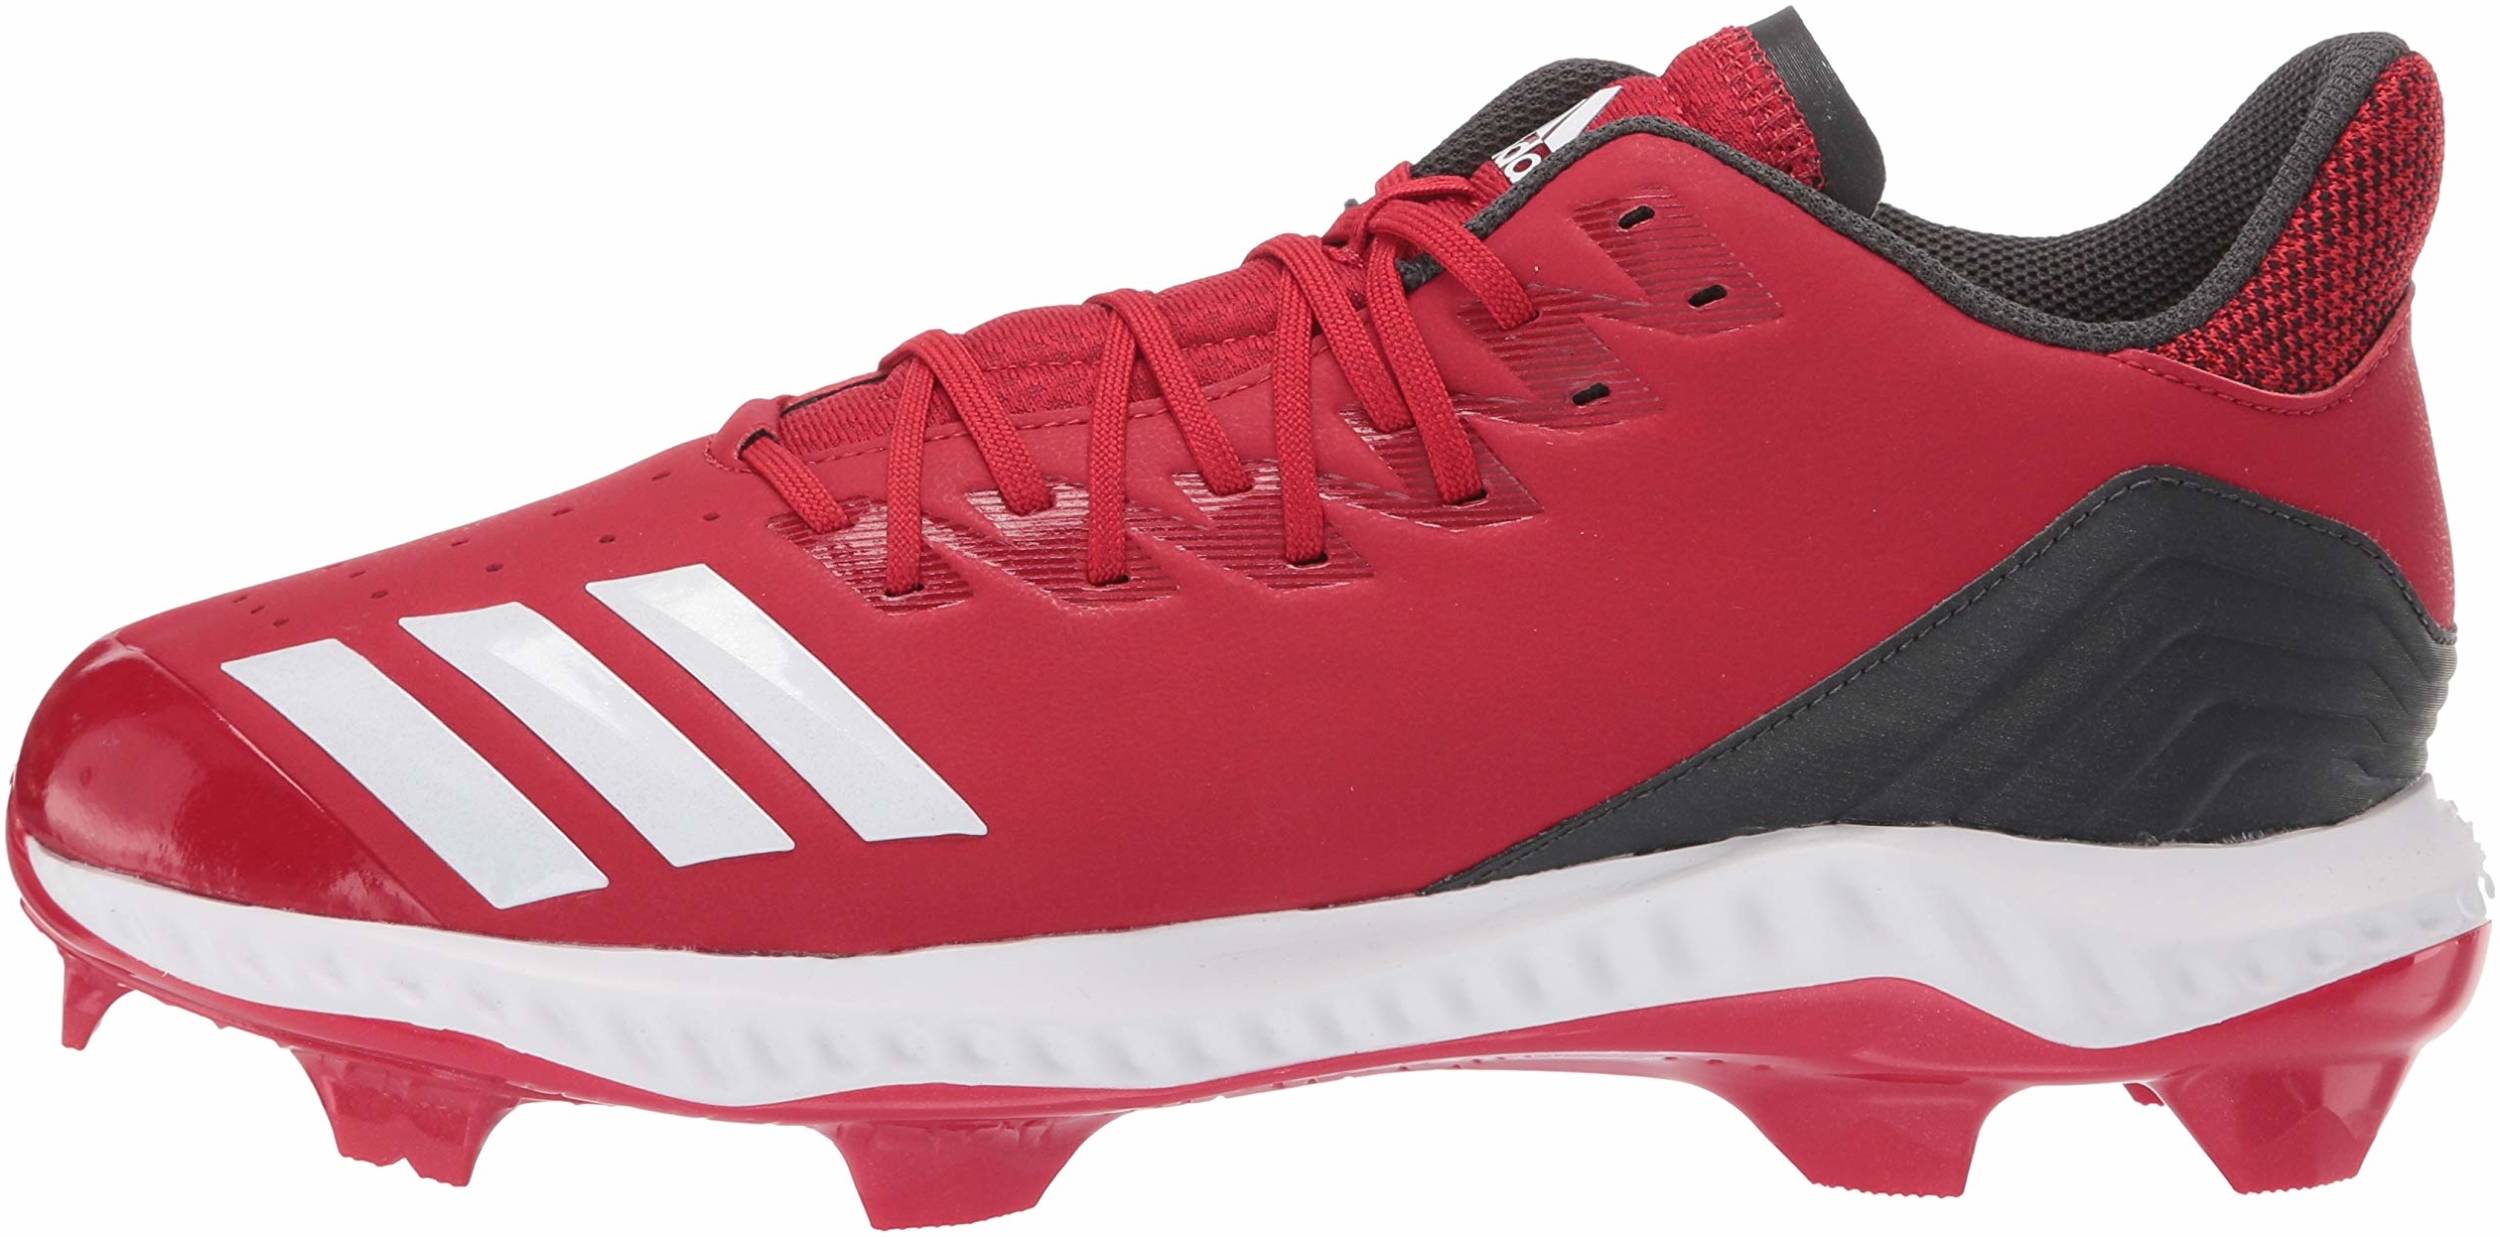 adidas bounce red